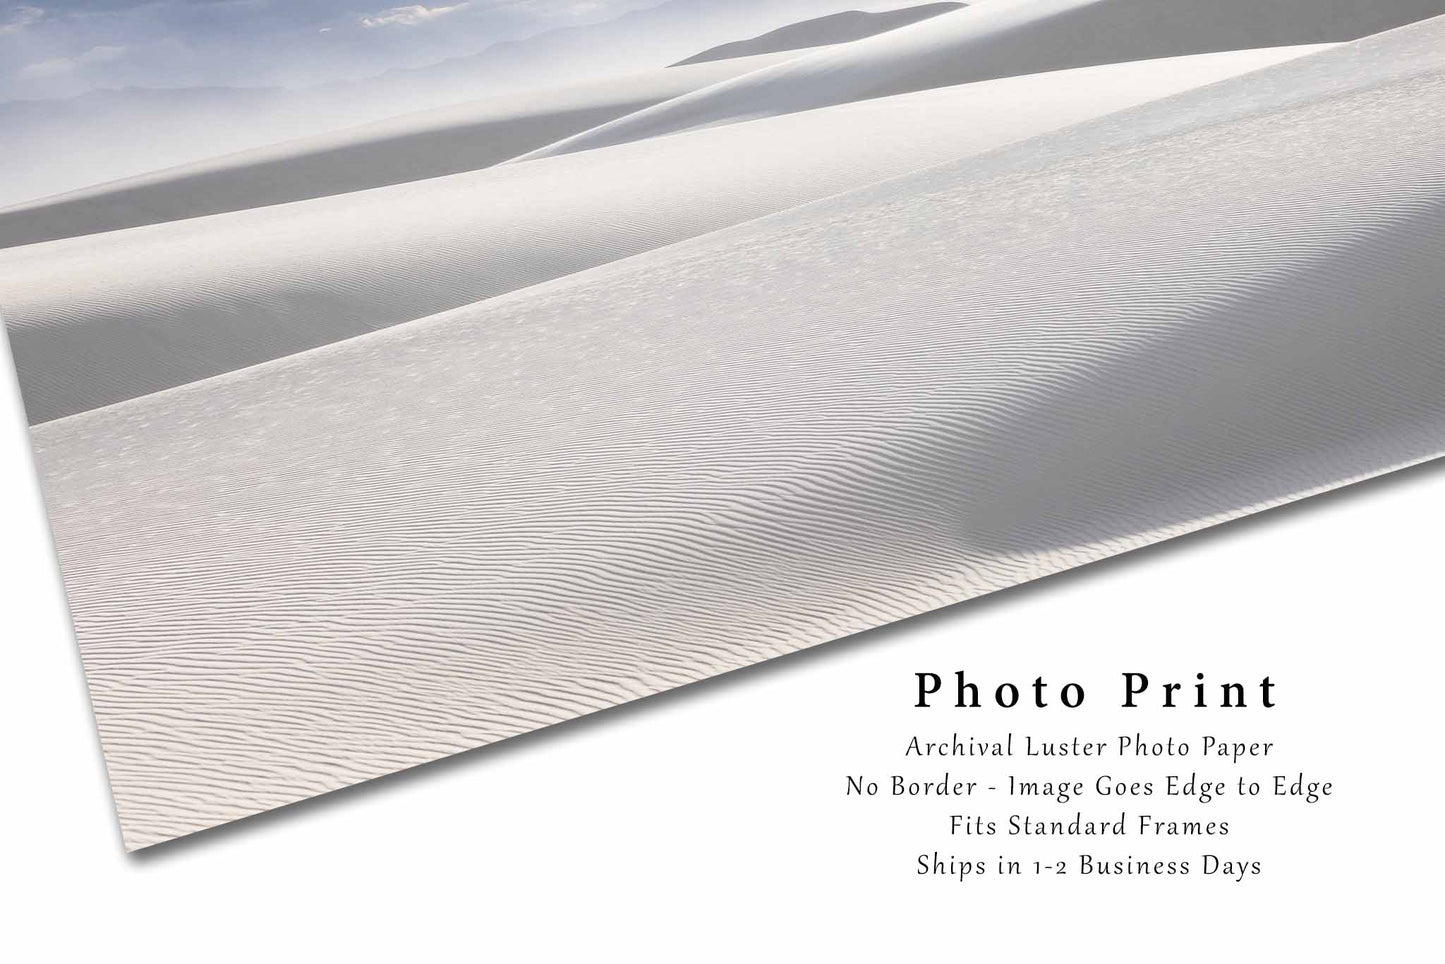 White Sands National Park Photo Print | Abstract Sand Dunes Picture | New Mexico Wall Art | Desert Photography | Southwestern Decor